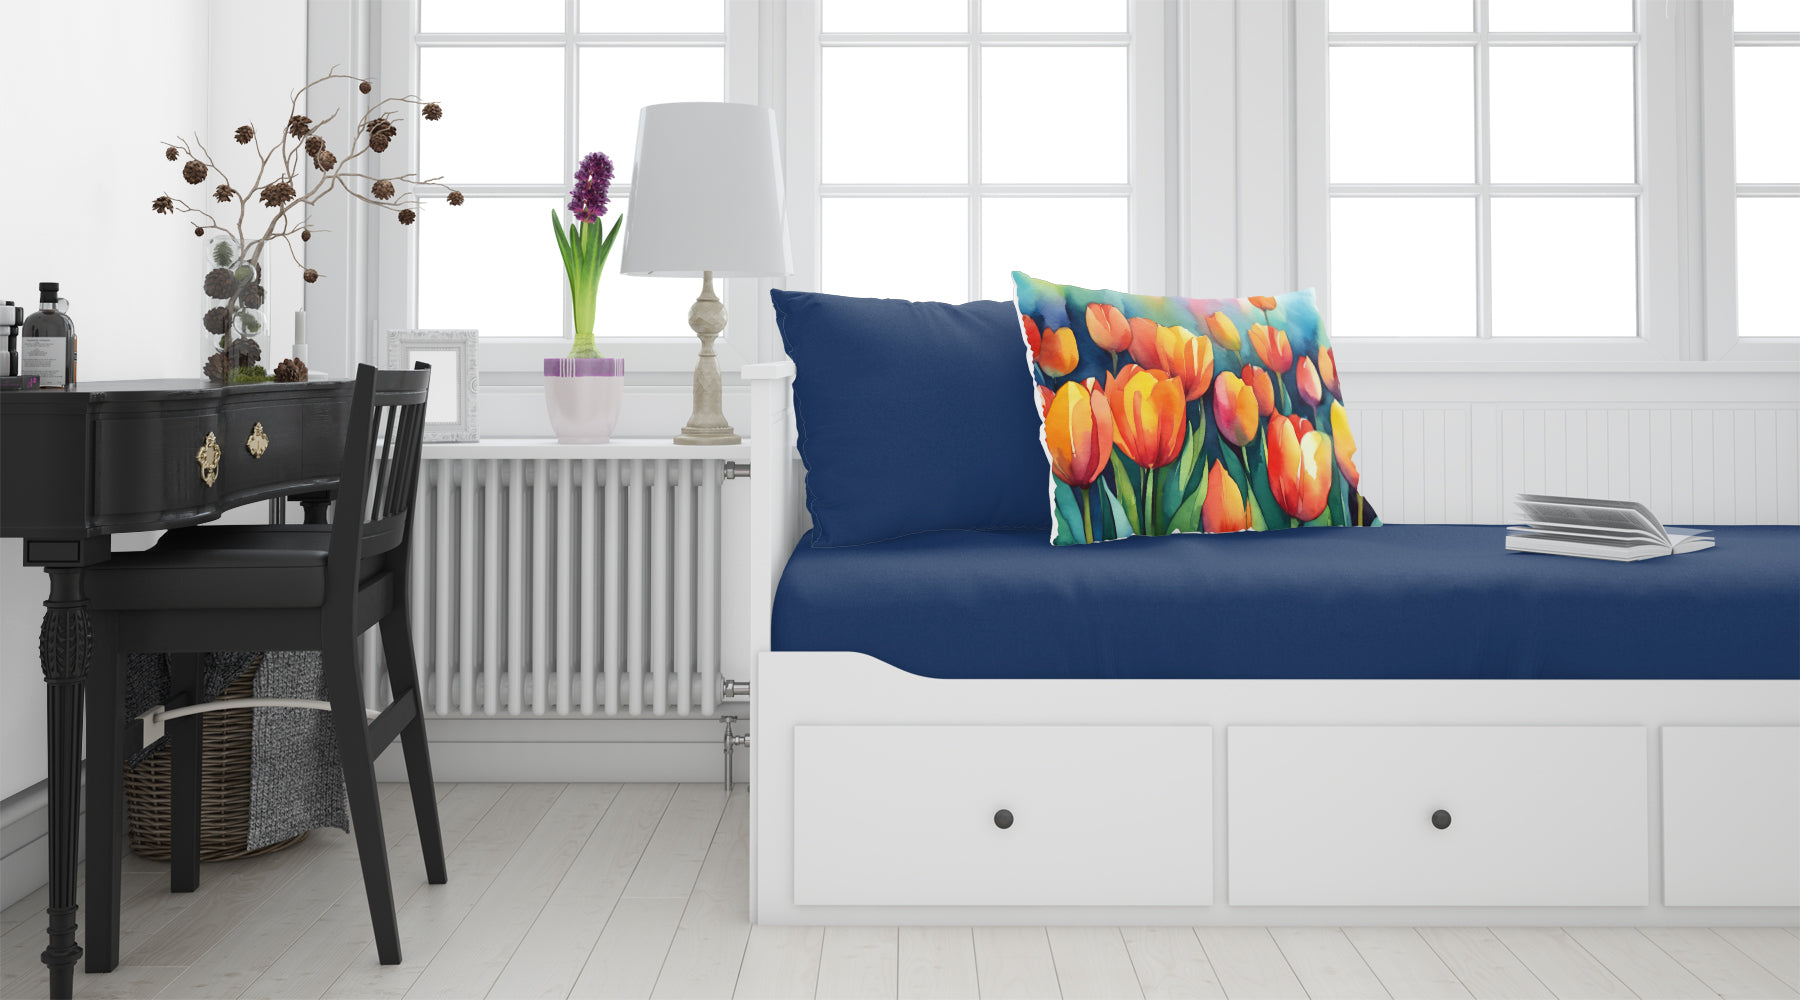 Buy this Tulips in Watercolor Fabric Standard Pillowcase